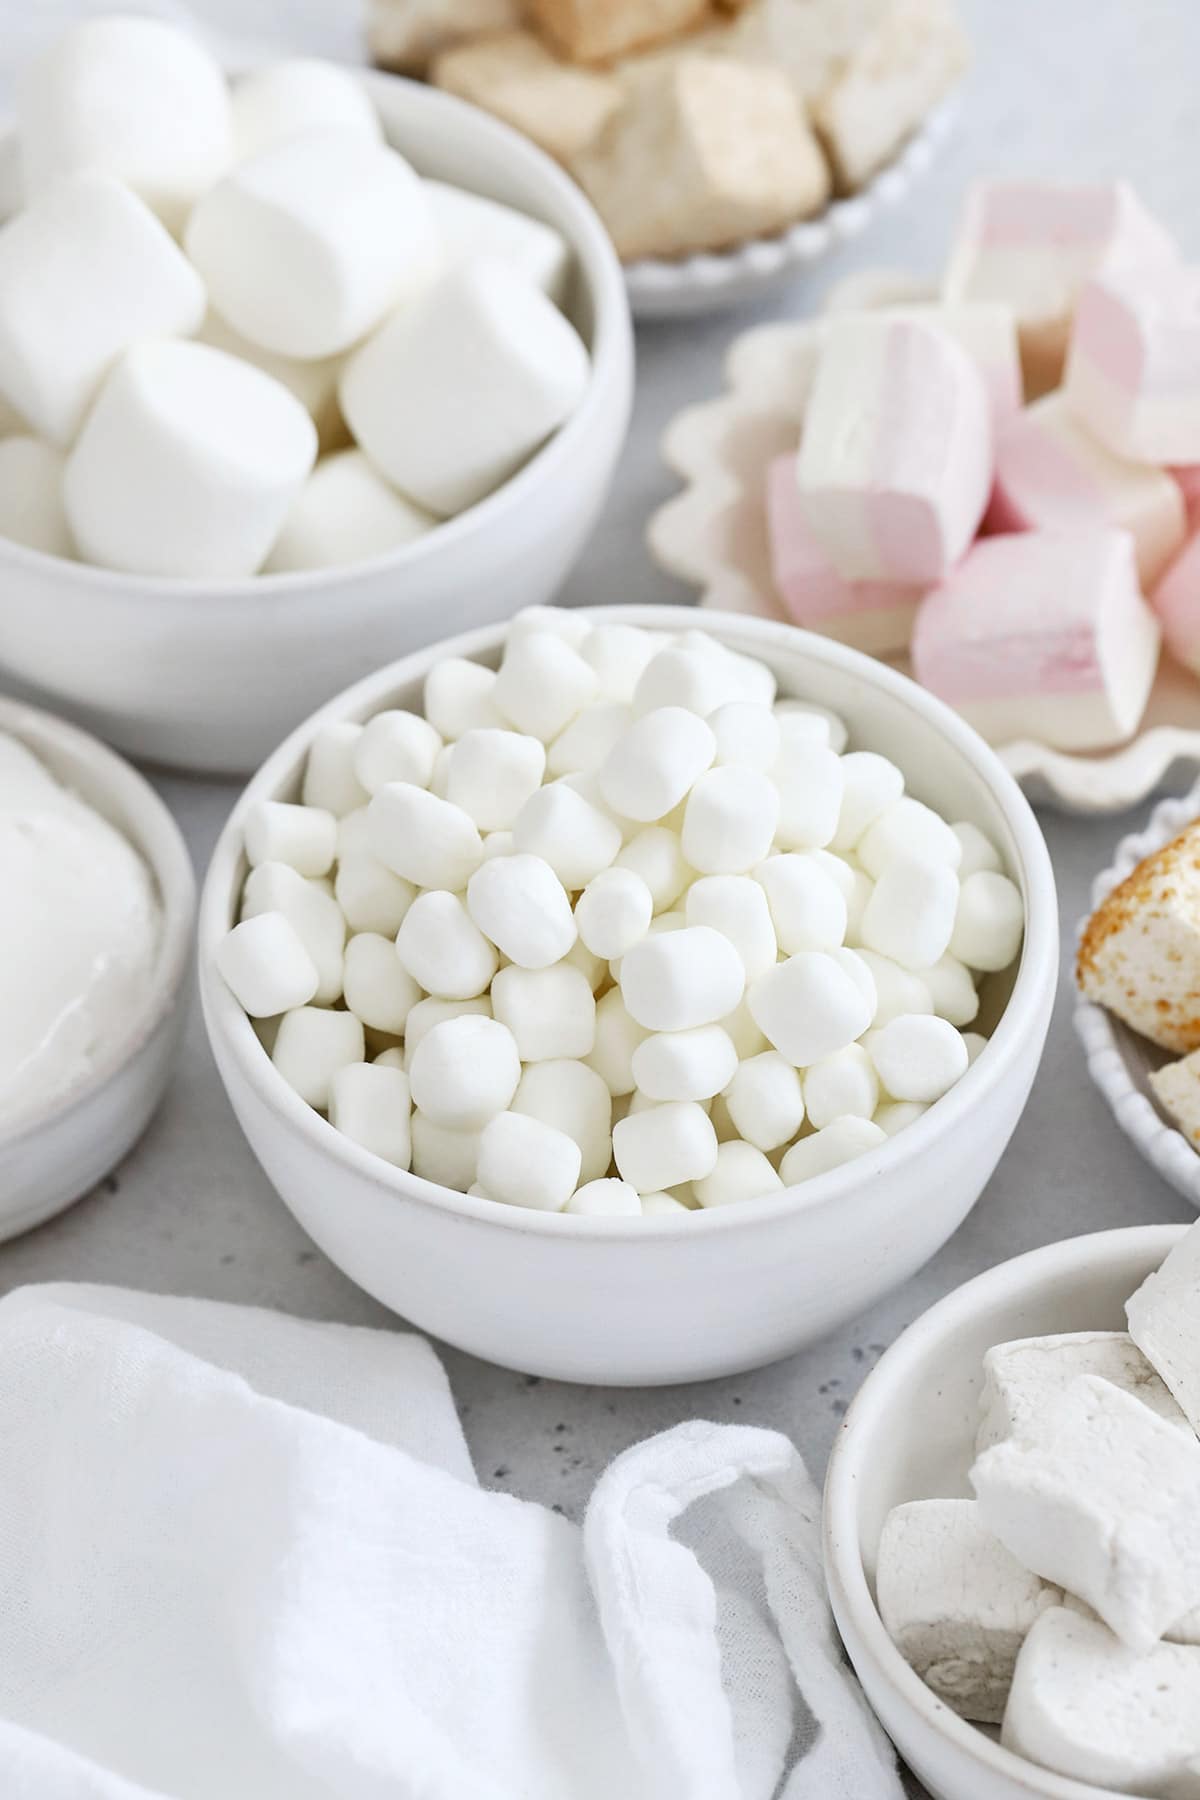 Front view of several bowls of gluten-free marshmallows in different sizes, flavors, and shapes